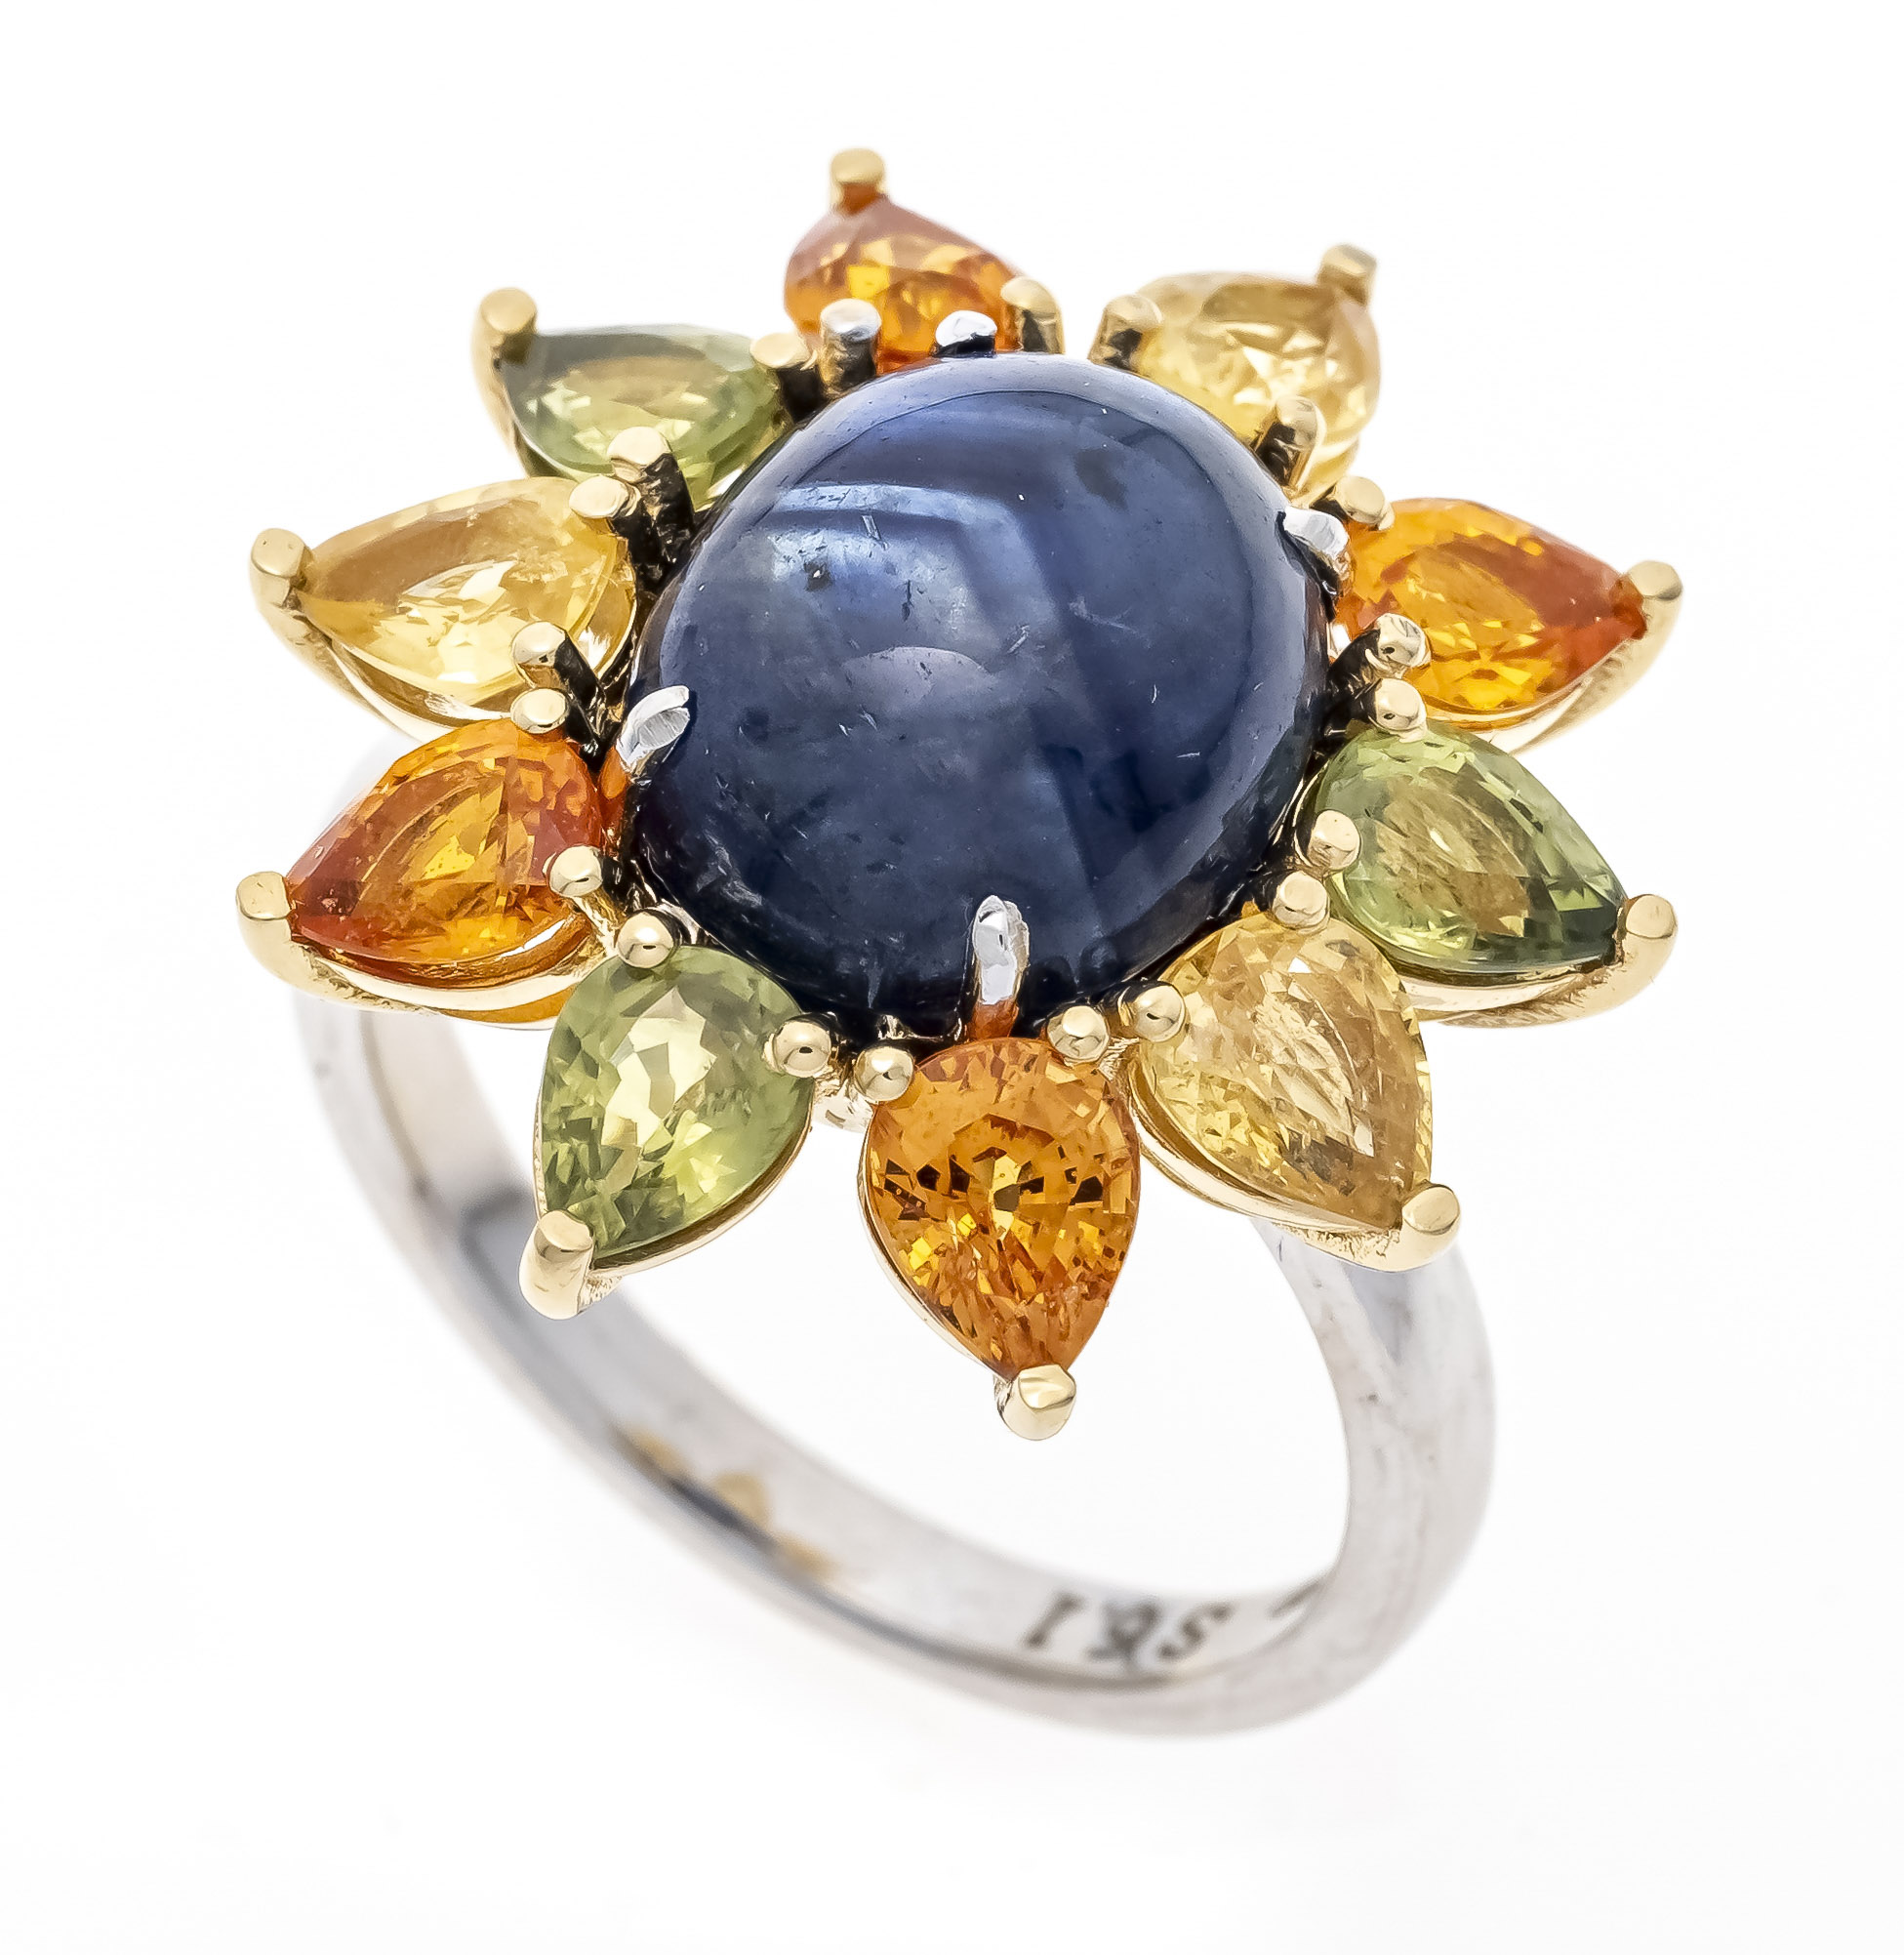 Multicolor sapphire ring WG 750/000 with an oval sapphire cabochon 6.1 ct (hallmarked) in a bright